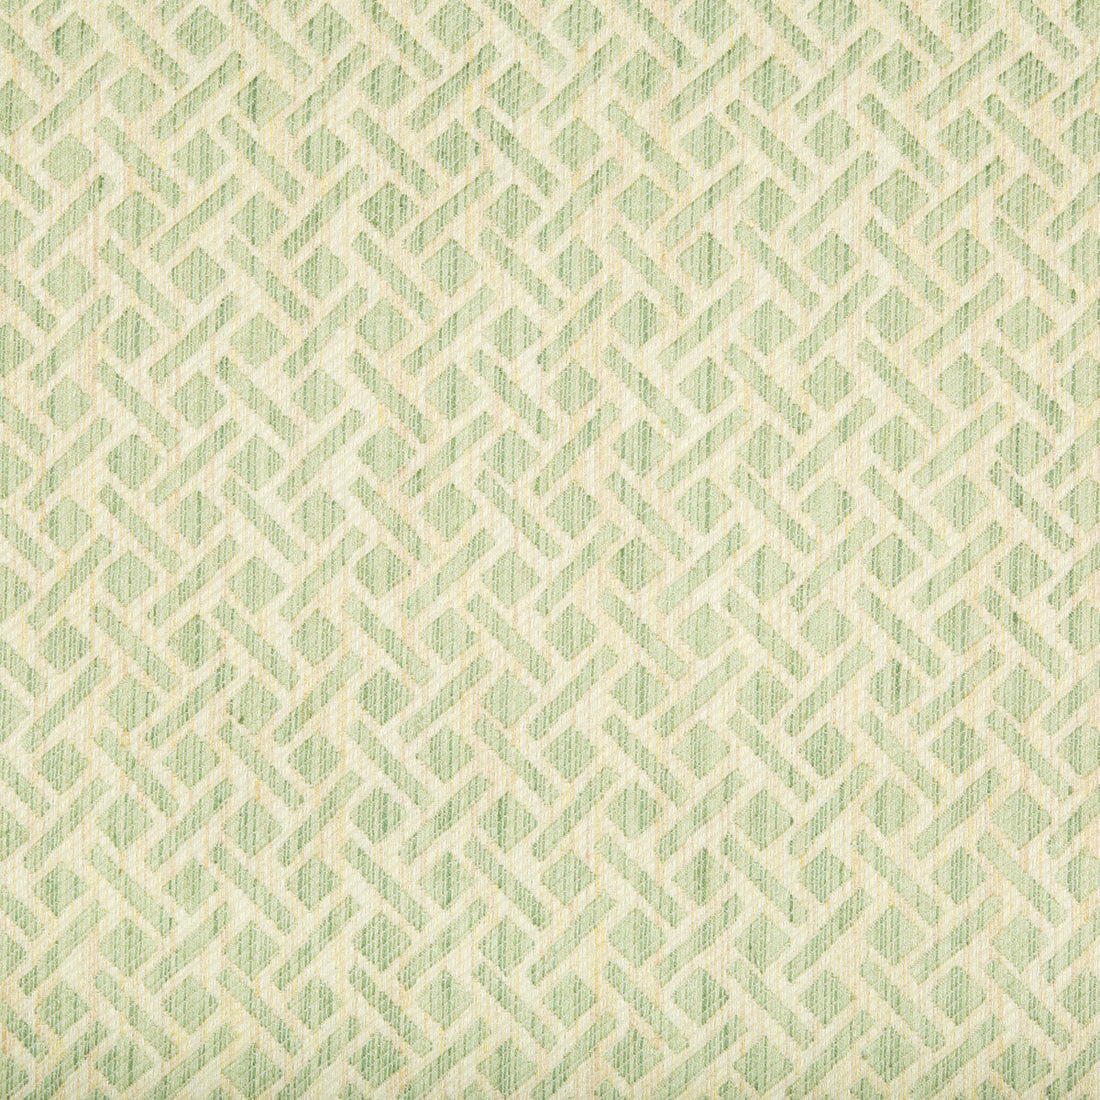 Comte Strie fabric in aloe color - pattern 8017141.113.0 - by Brunschwig &amp; Fils in the Baronet collection